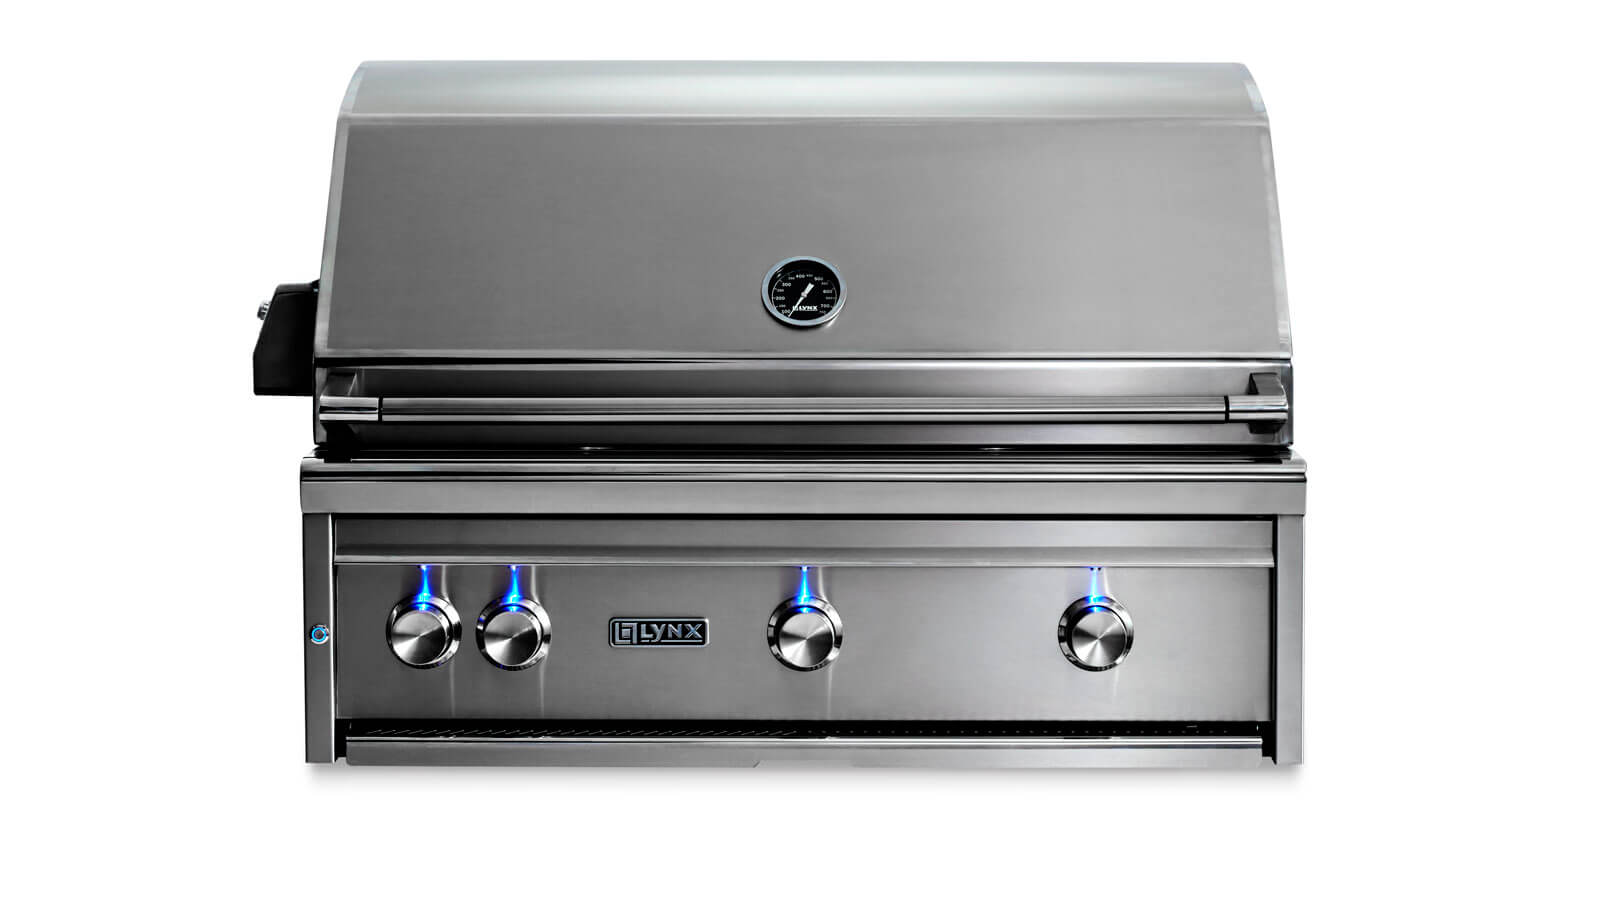 Lynx 36” Professional Built-in Grill with All Ceramic Burners and Rotisserie (L36R-3)